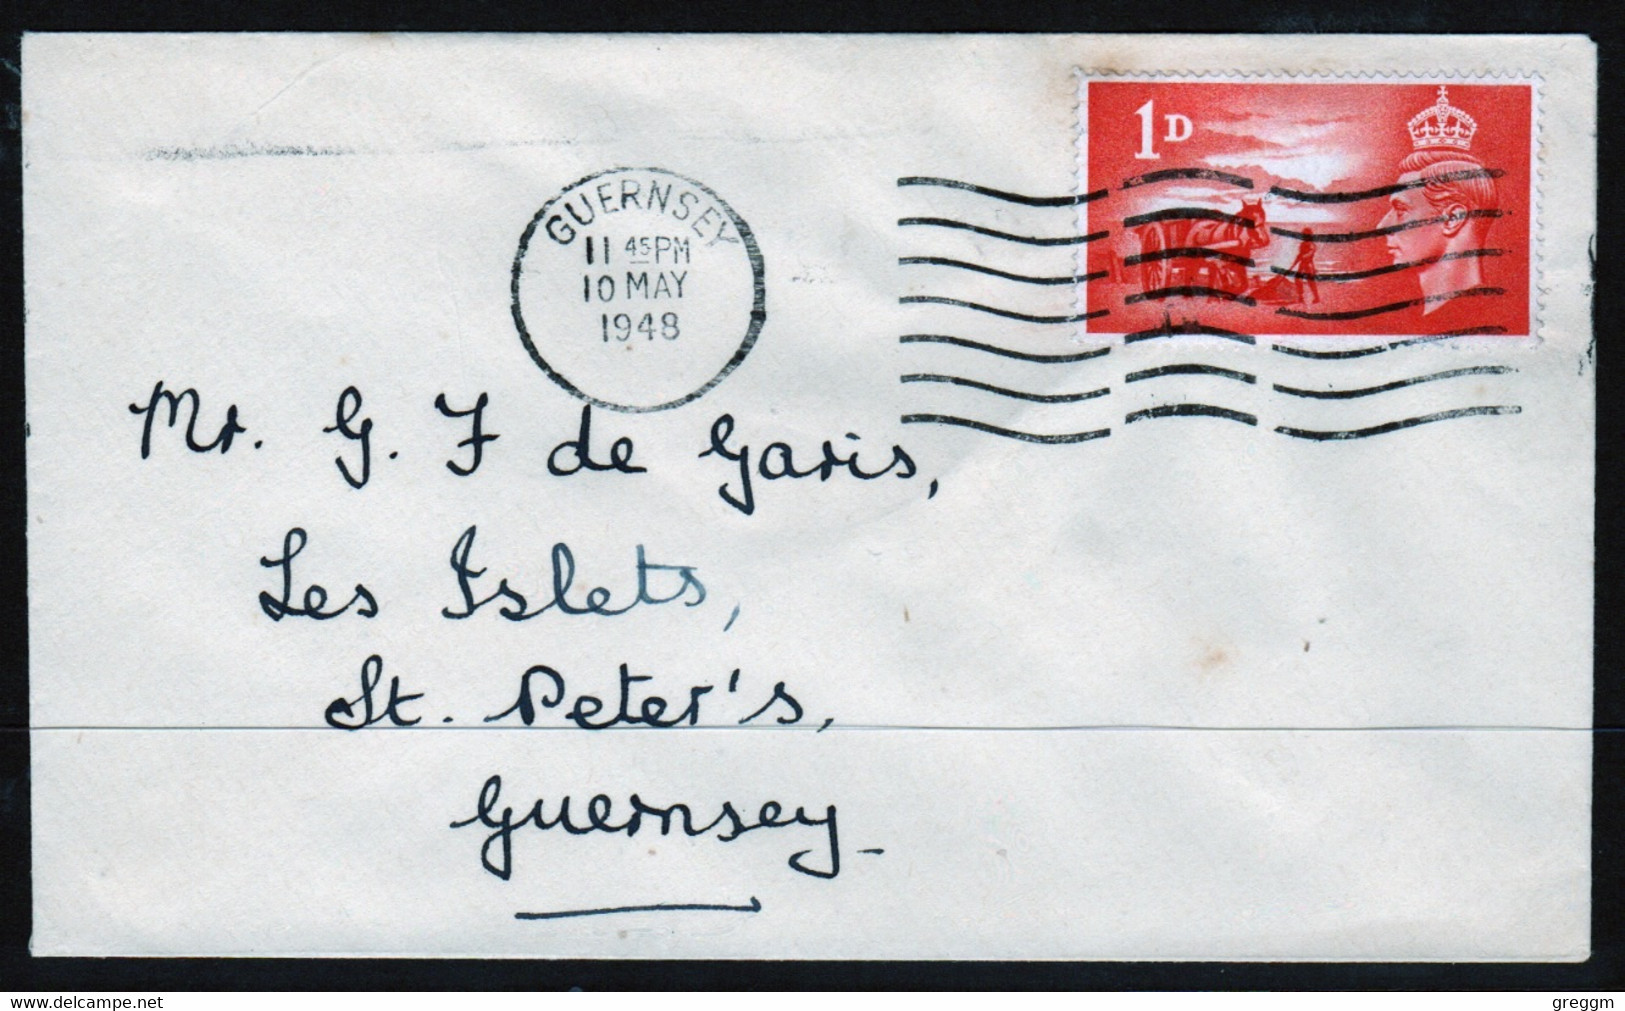 Channel Islands Regional Issue First Day Cover Envelope Only With One Value. - Ohne Zuordnung